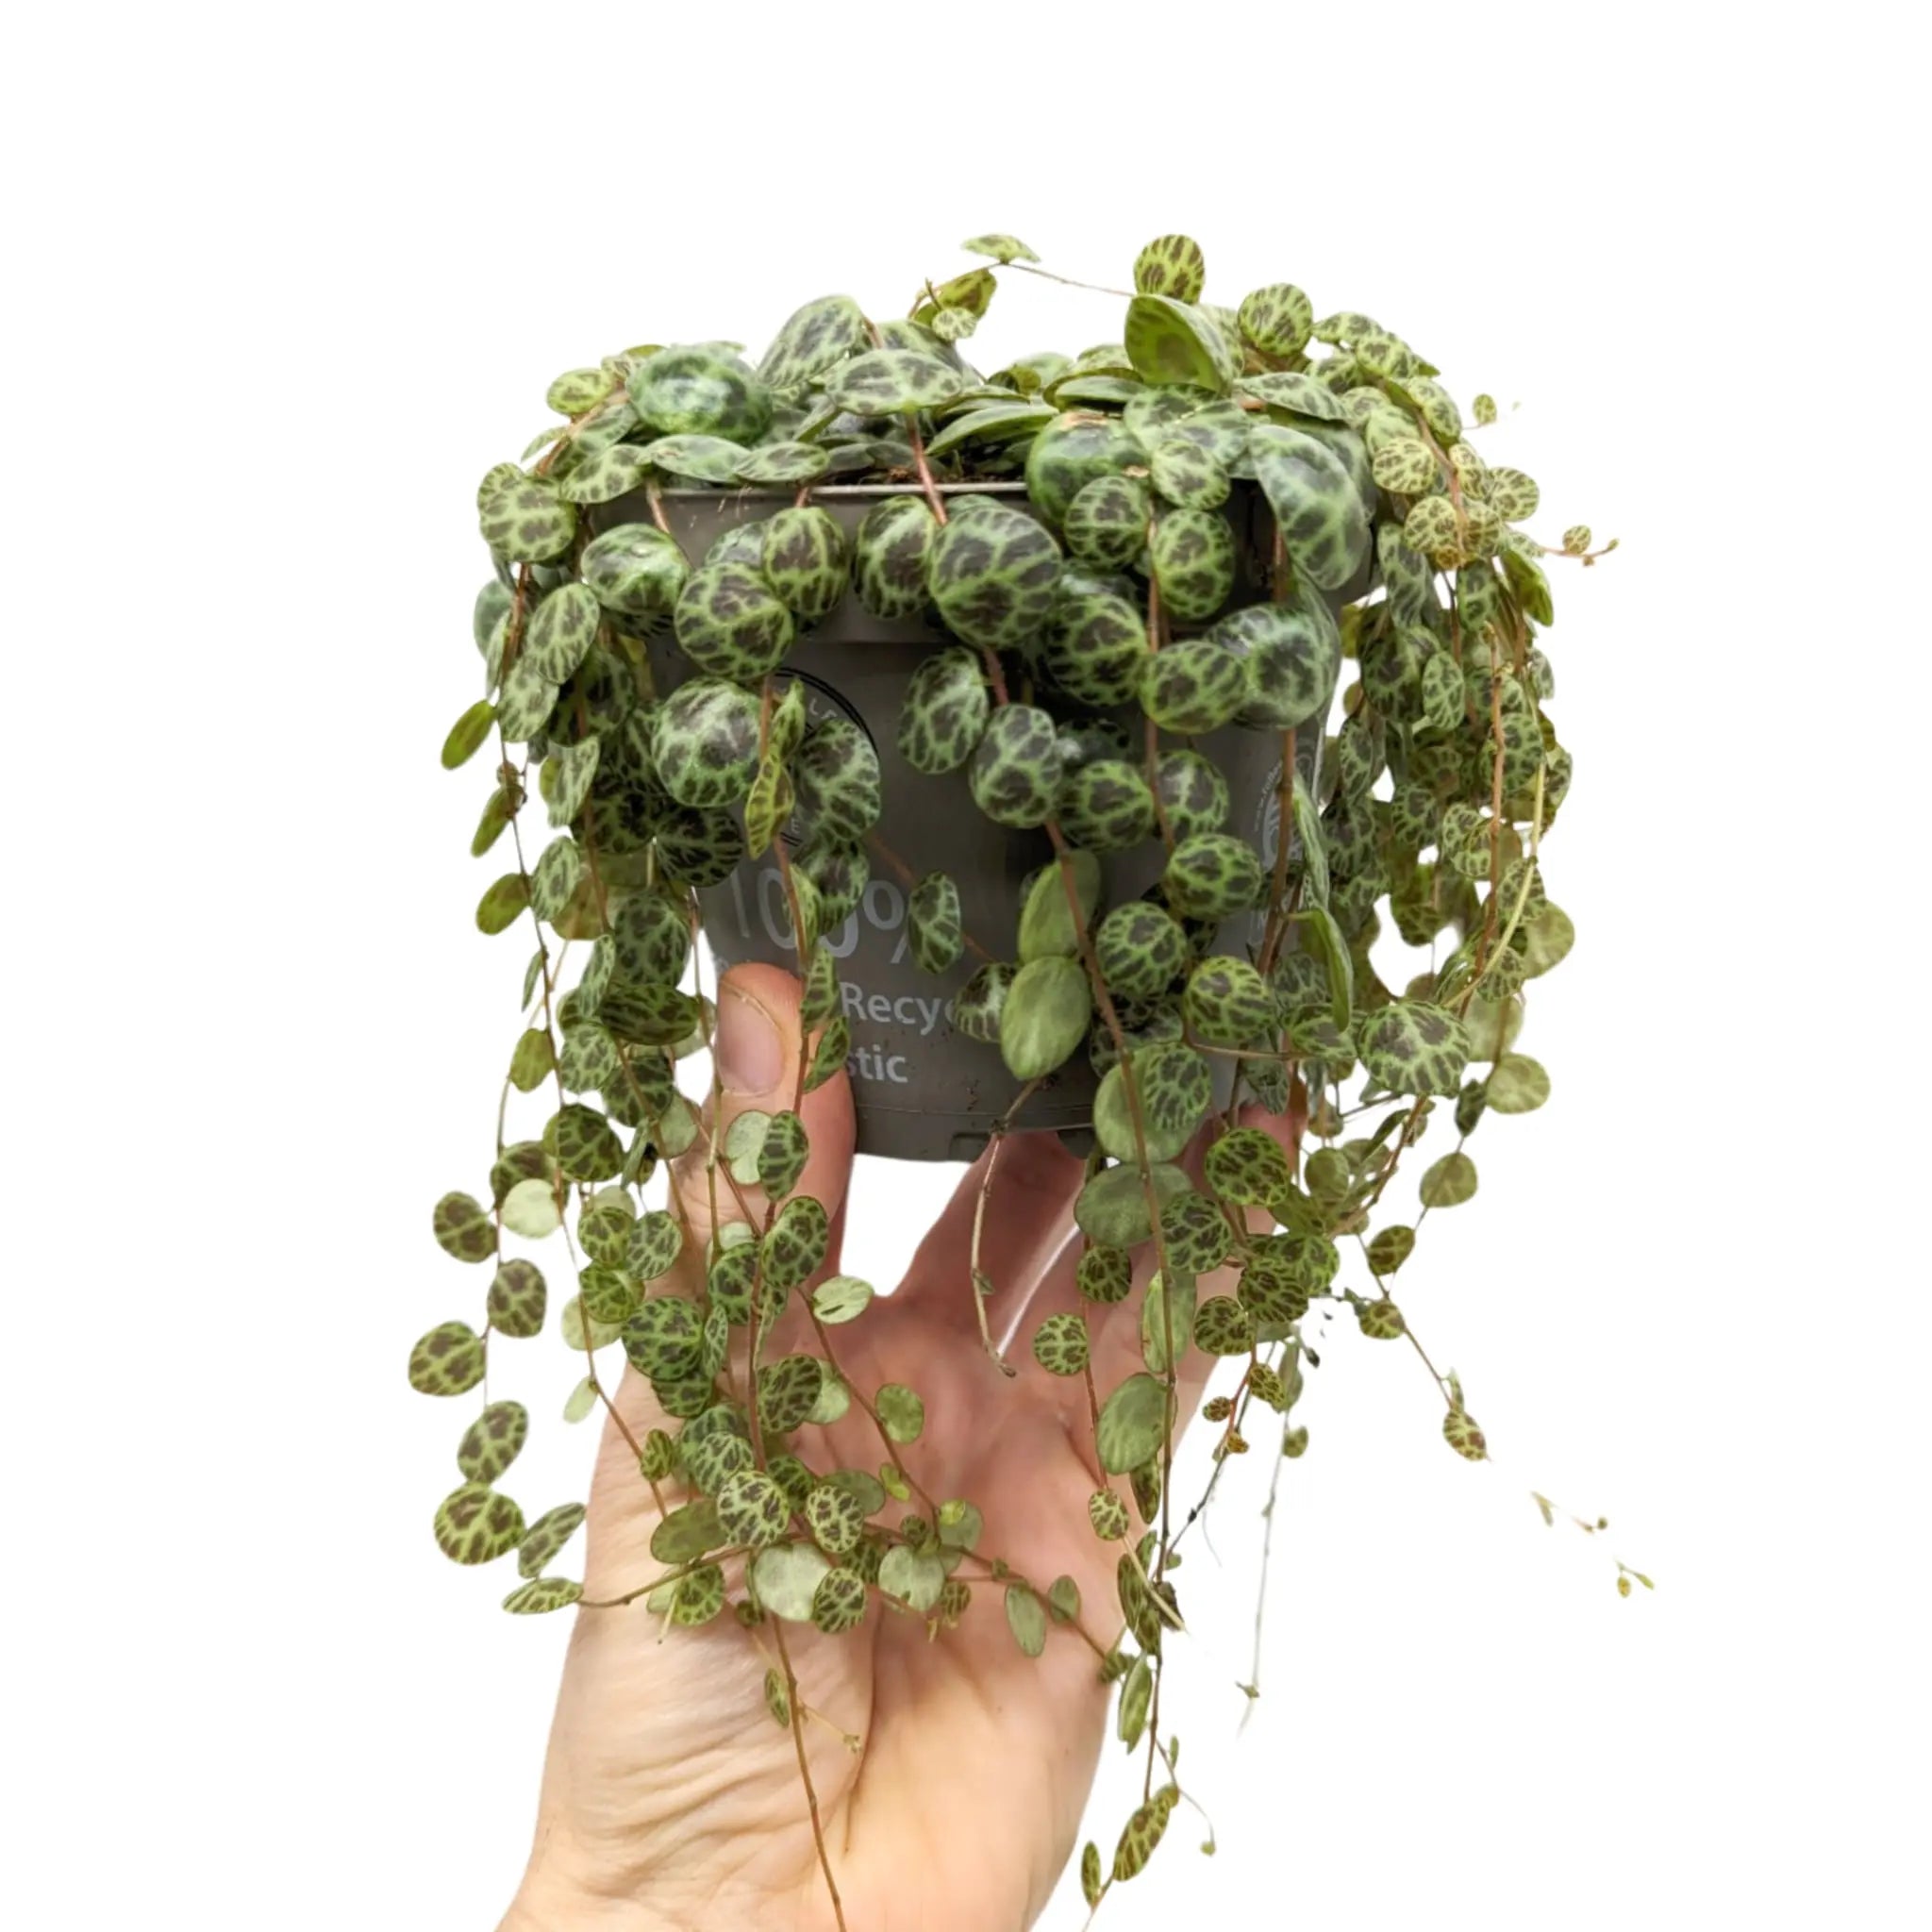 Peperomia Prostrata - String of Turtles Leaf Culture